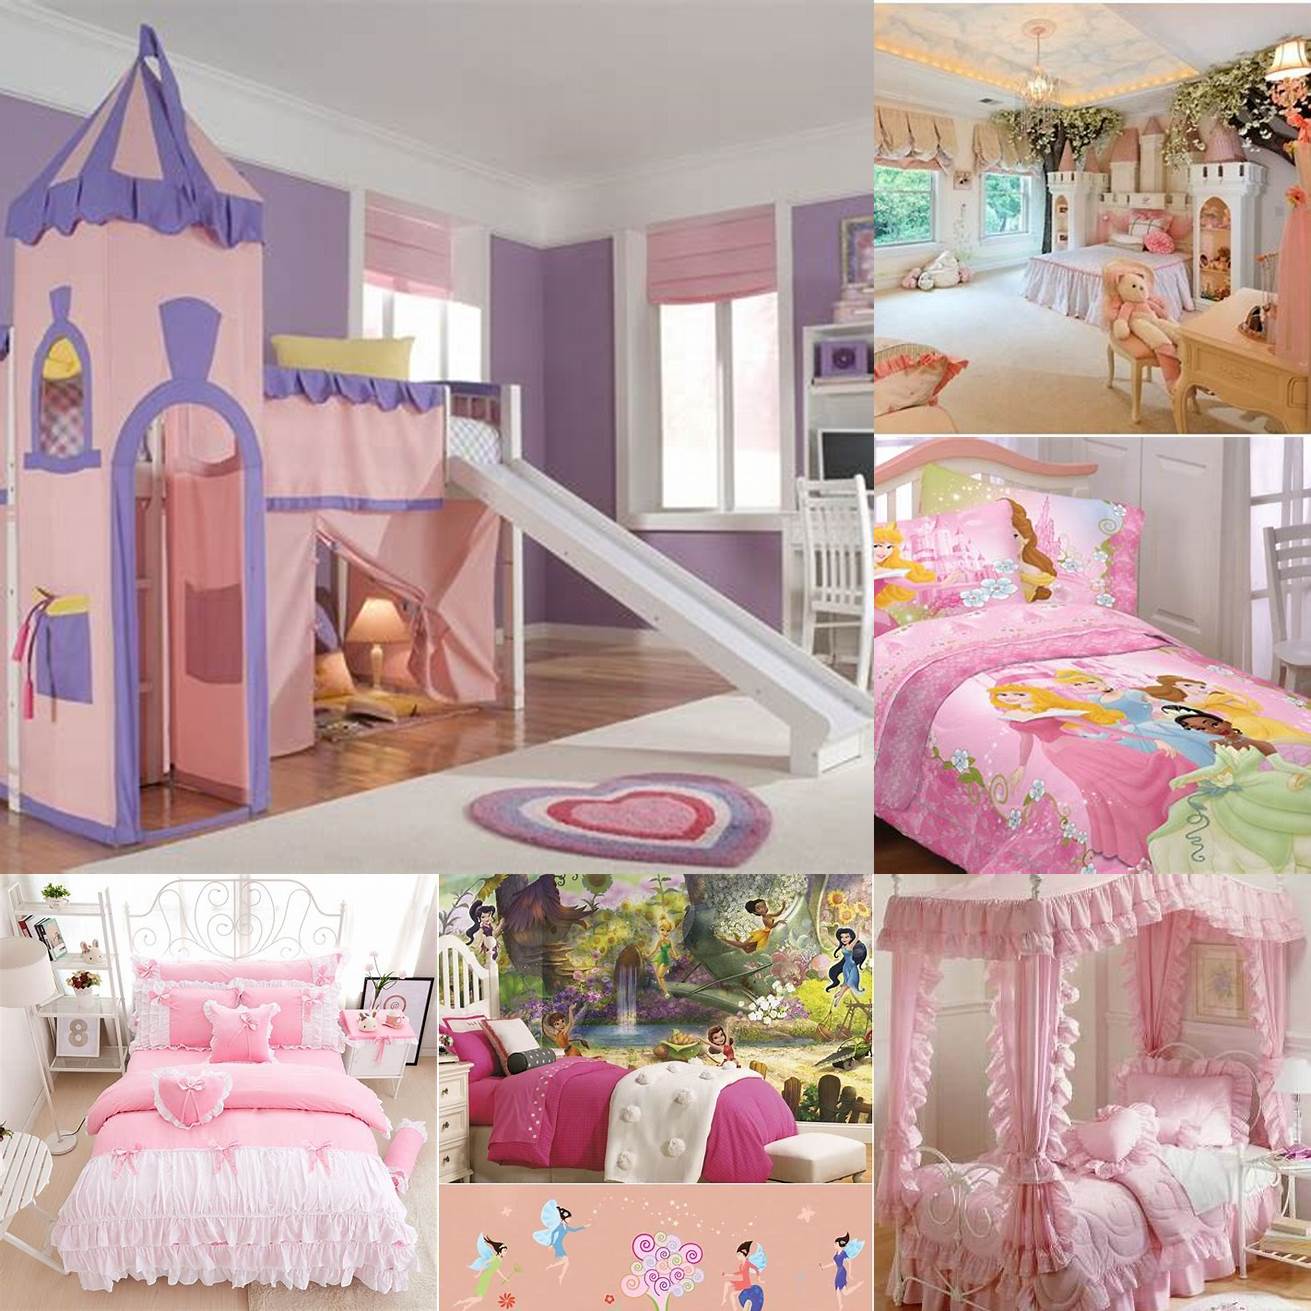 A fairy tale-inspired bed for little girls who love all things pink and frilly